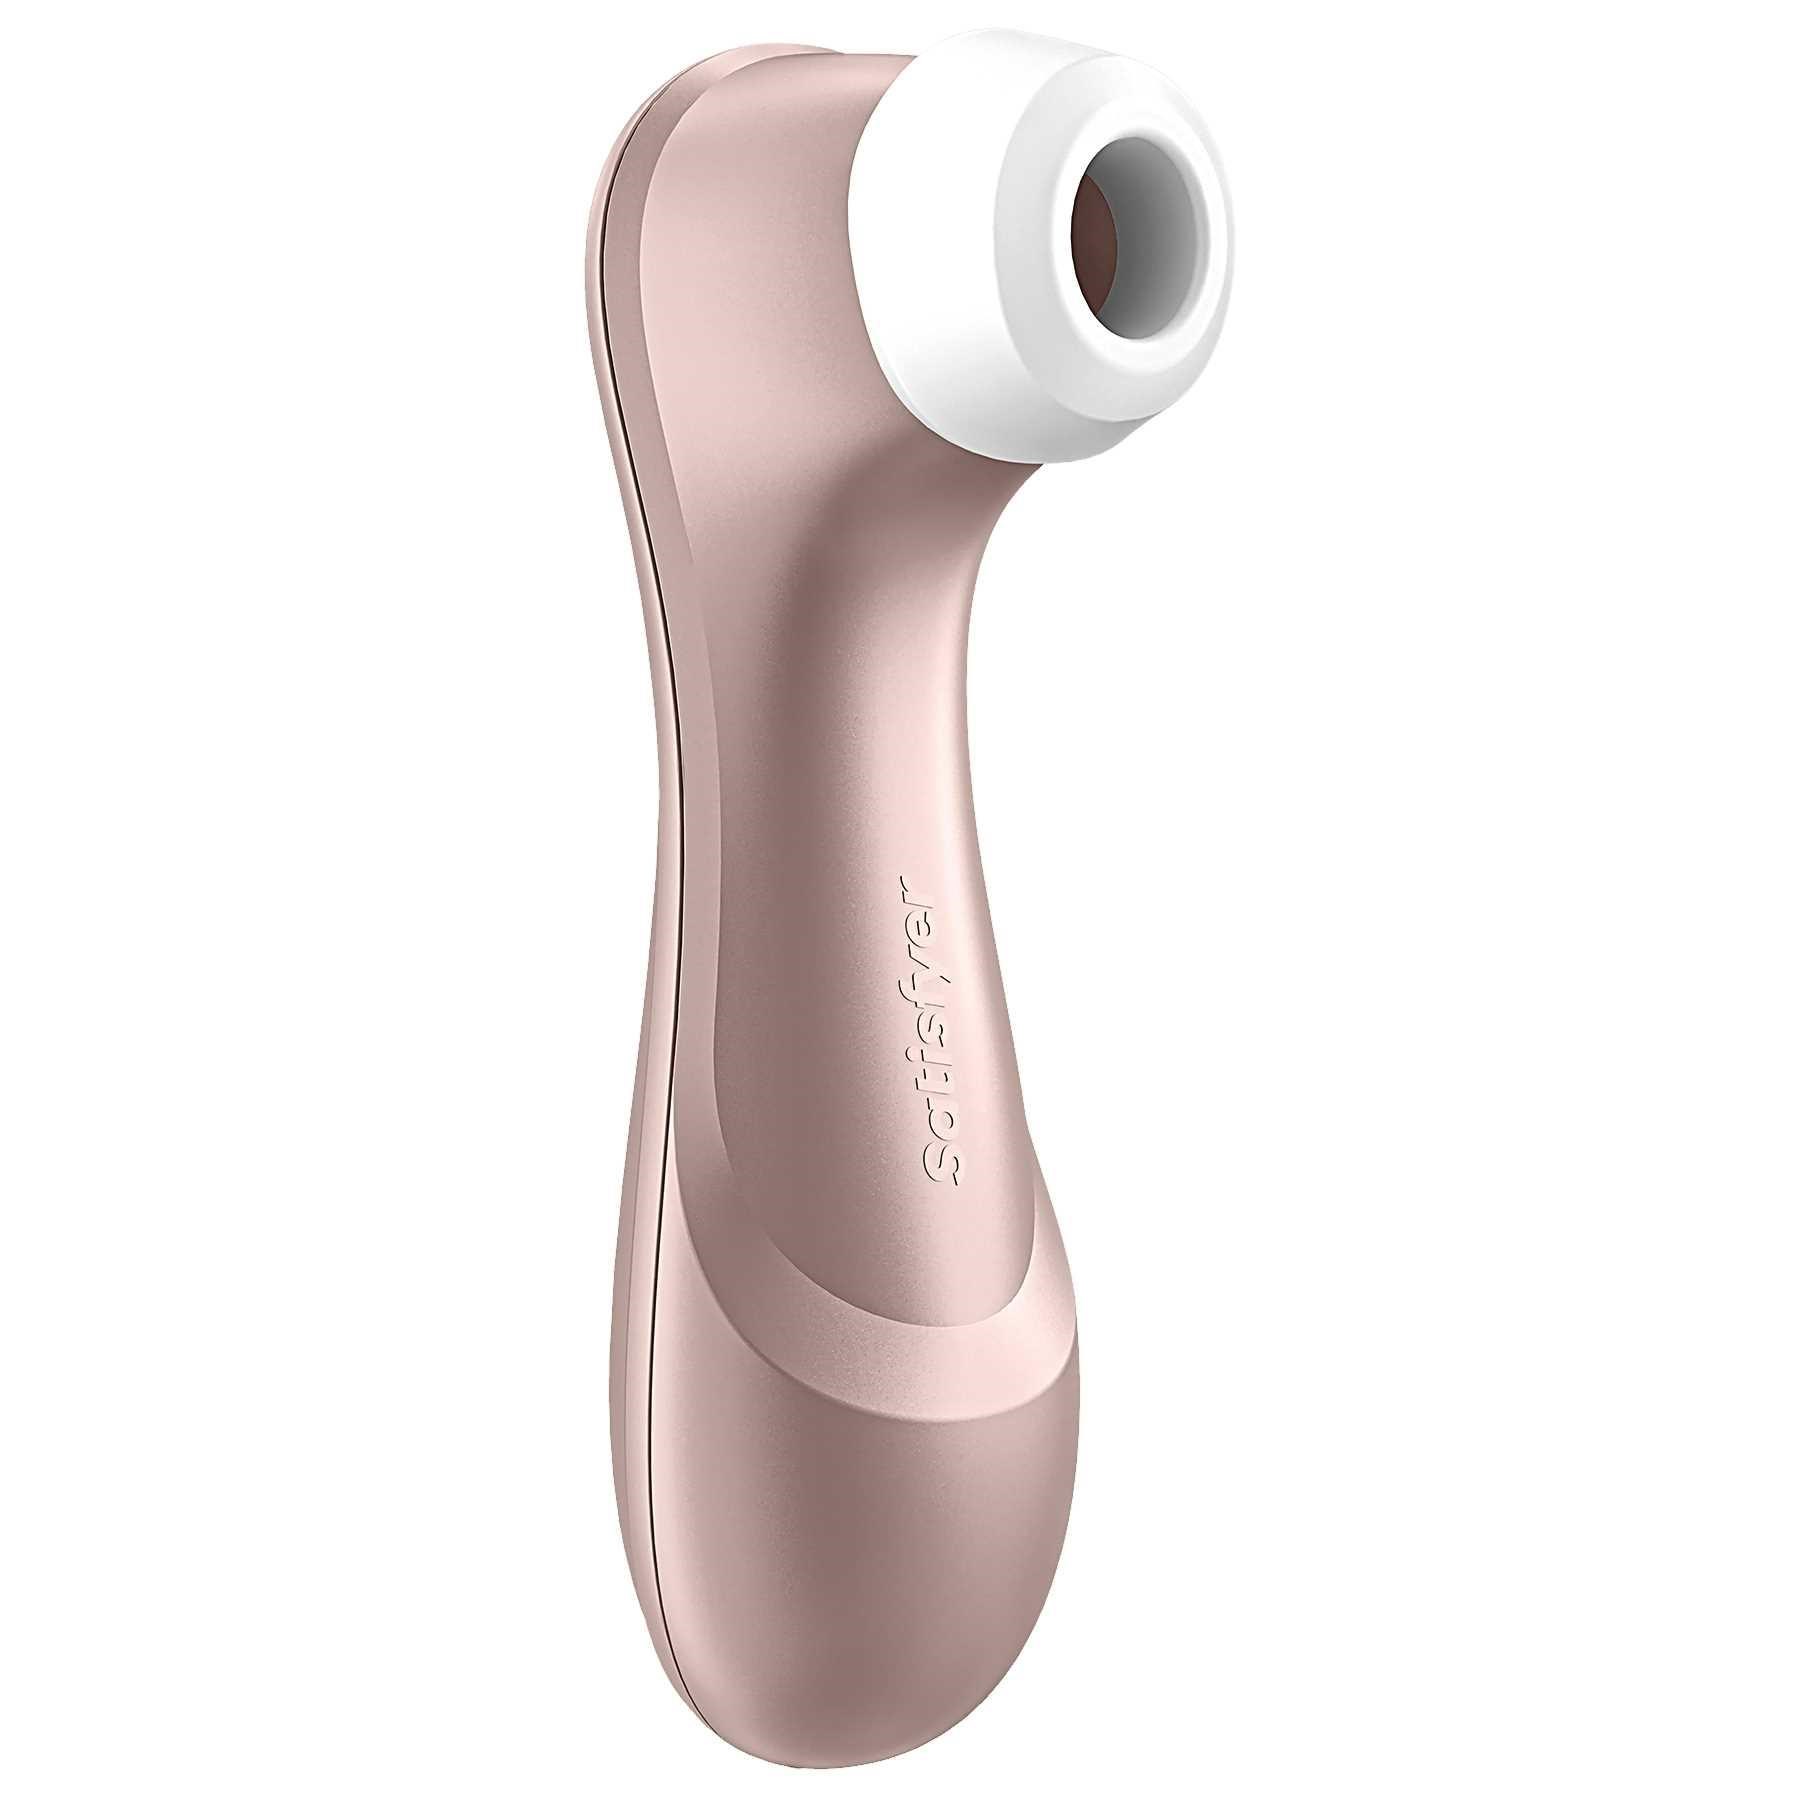 Satisfyer Pro 2 - Next Generation gold side view